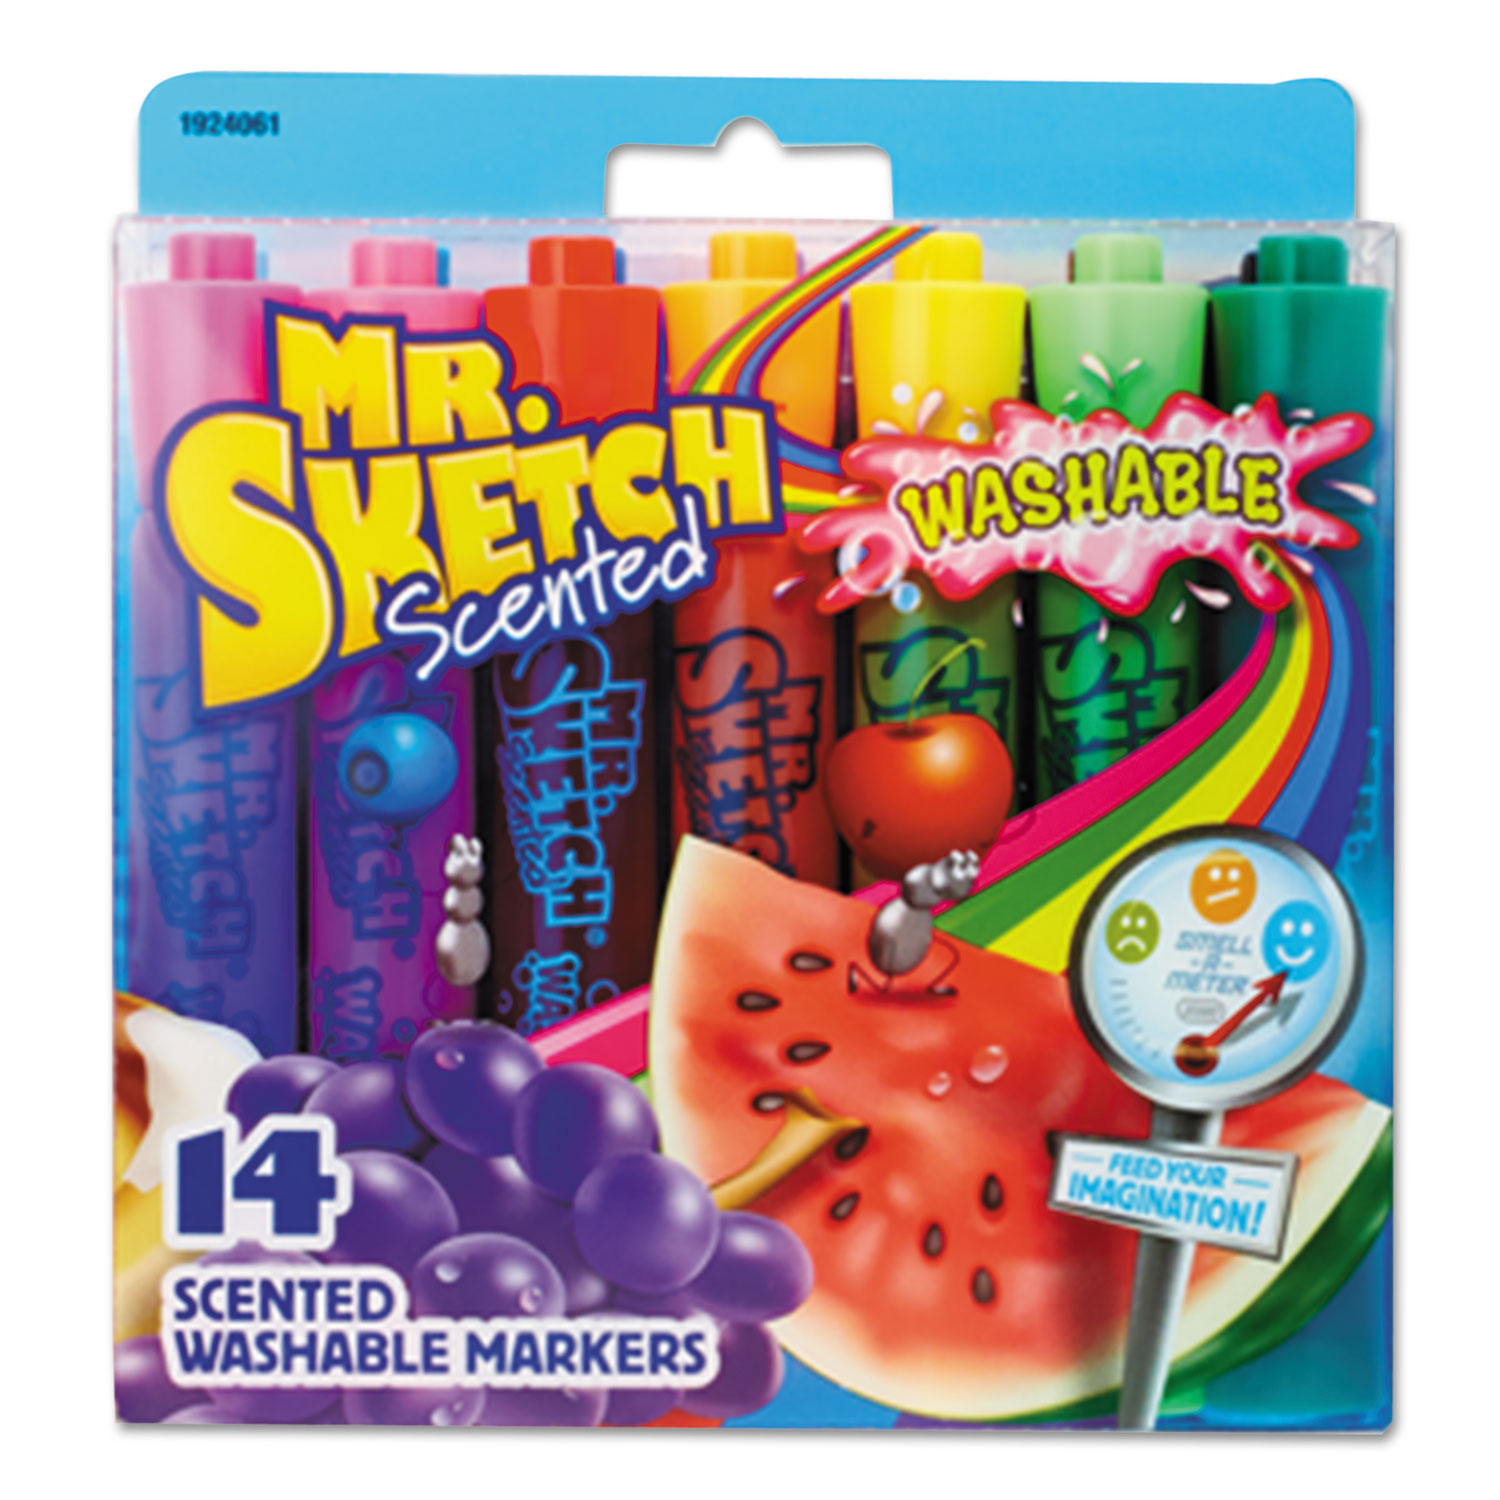 Washable Scented Markers, Chisel Tip, Assorted Colors, 14-Count -  SAN1924061, Sanford L.P.